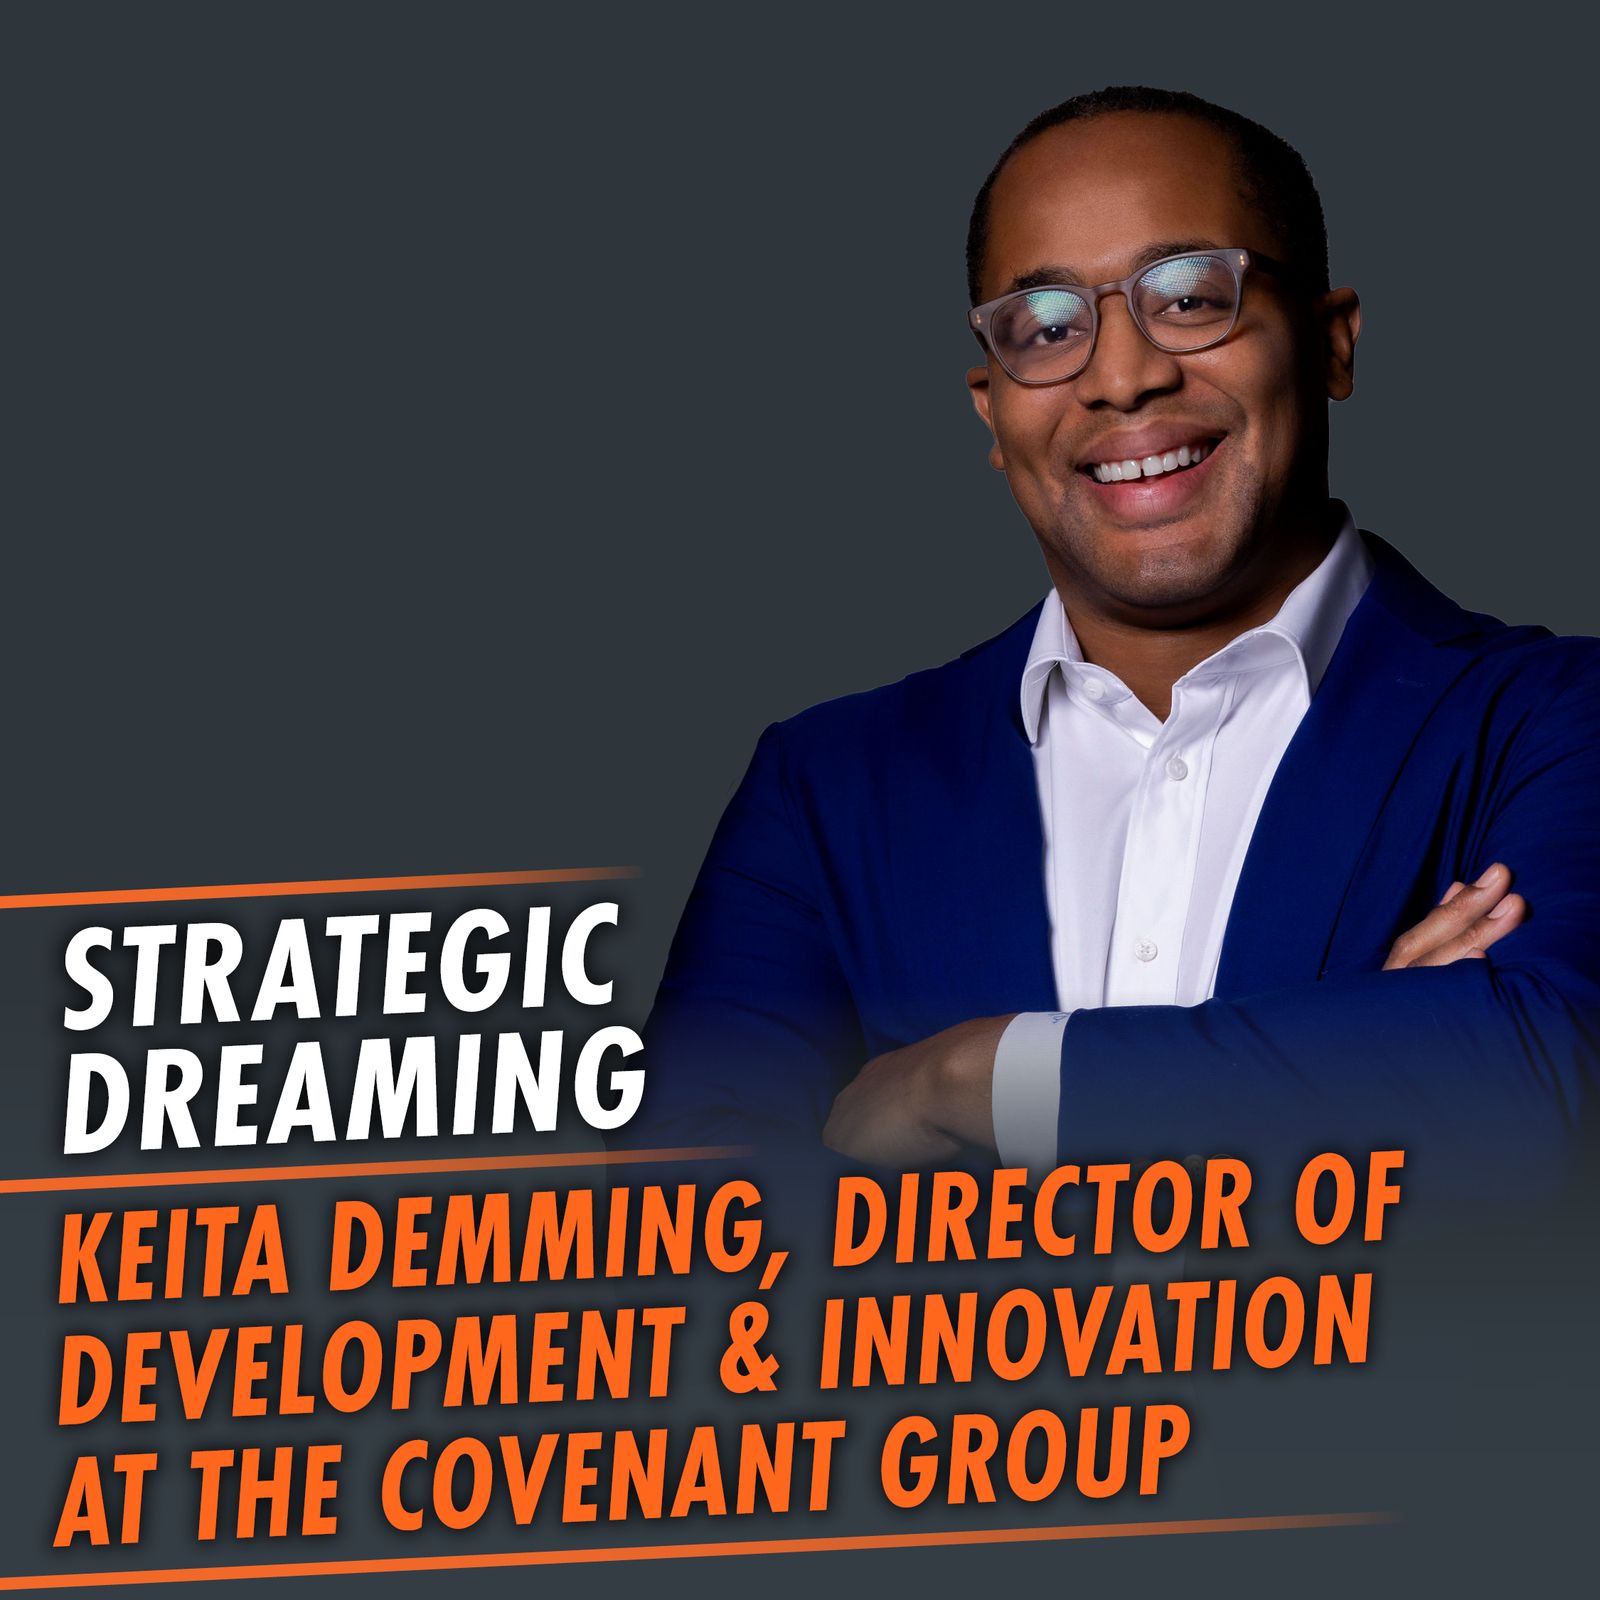 340: Strategic Dreaming featuring Keita Demming, Director of Development & Innovation at The Covenant Group